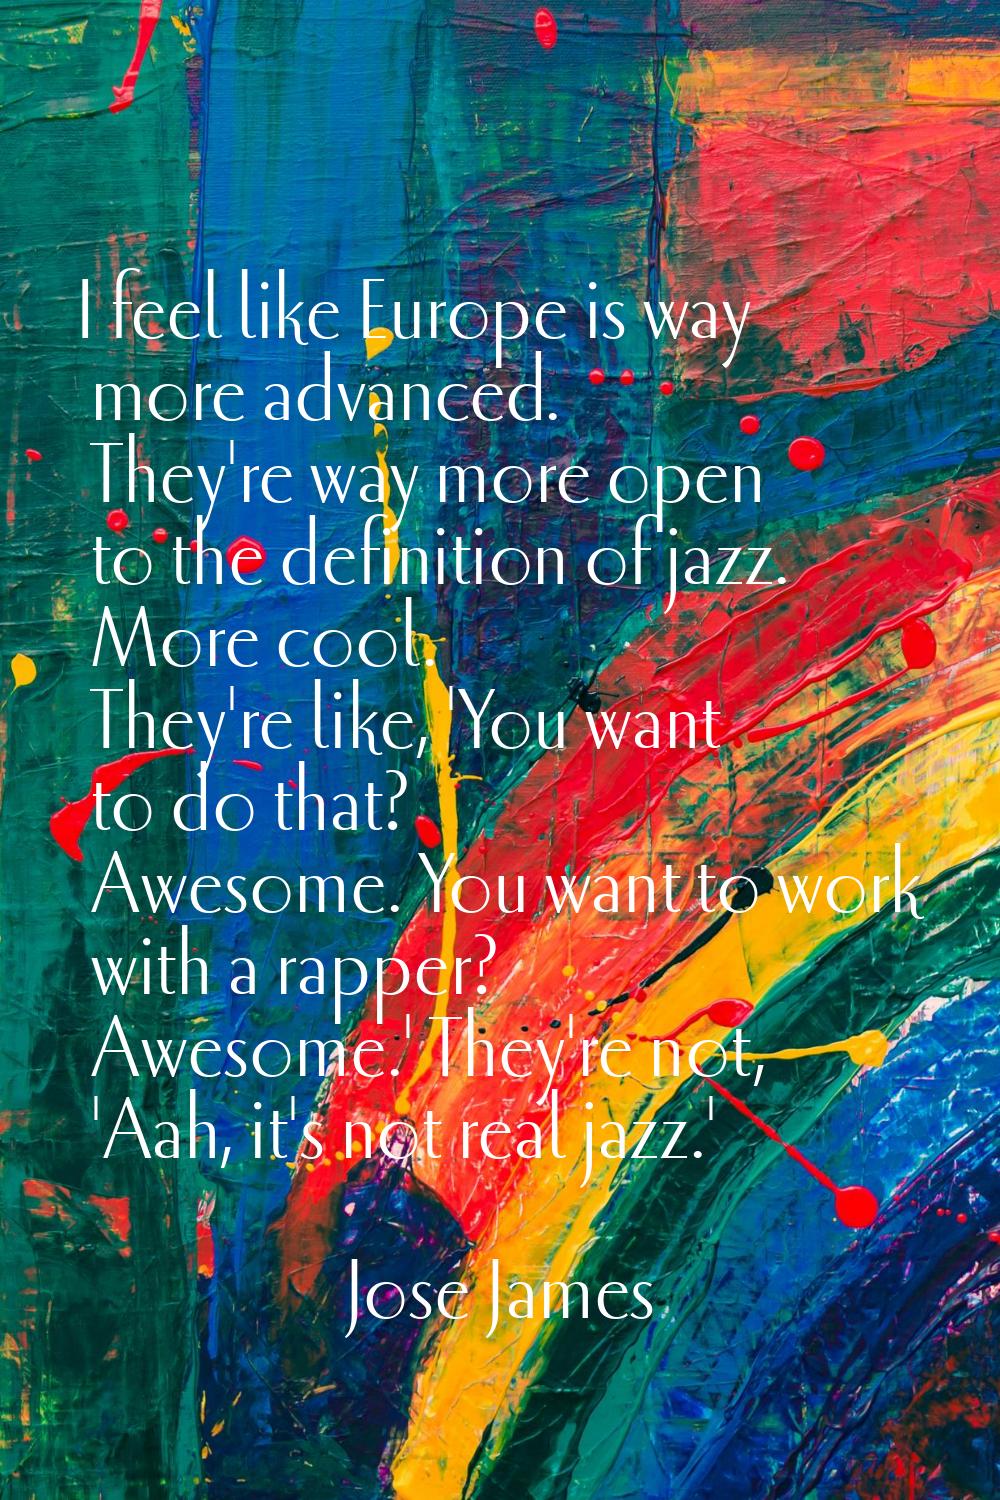 I feel like Europe is way more advanced. They're way more open to the definition of jazz. More cool